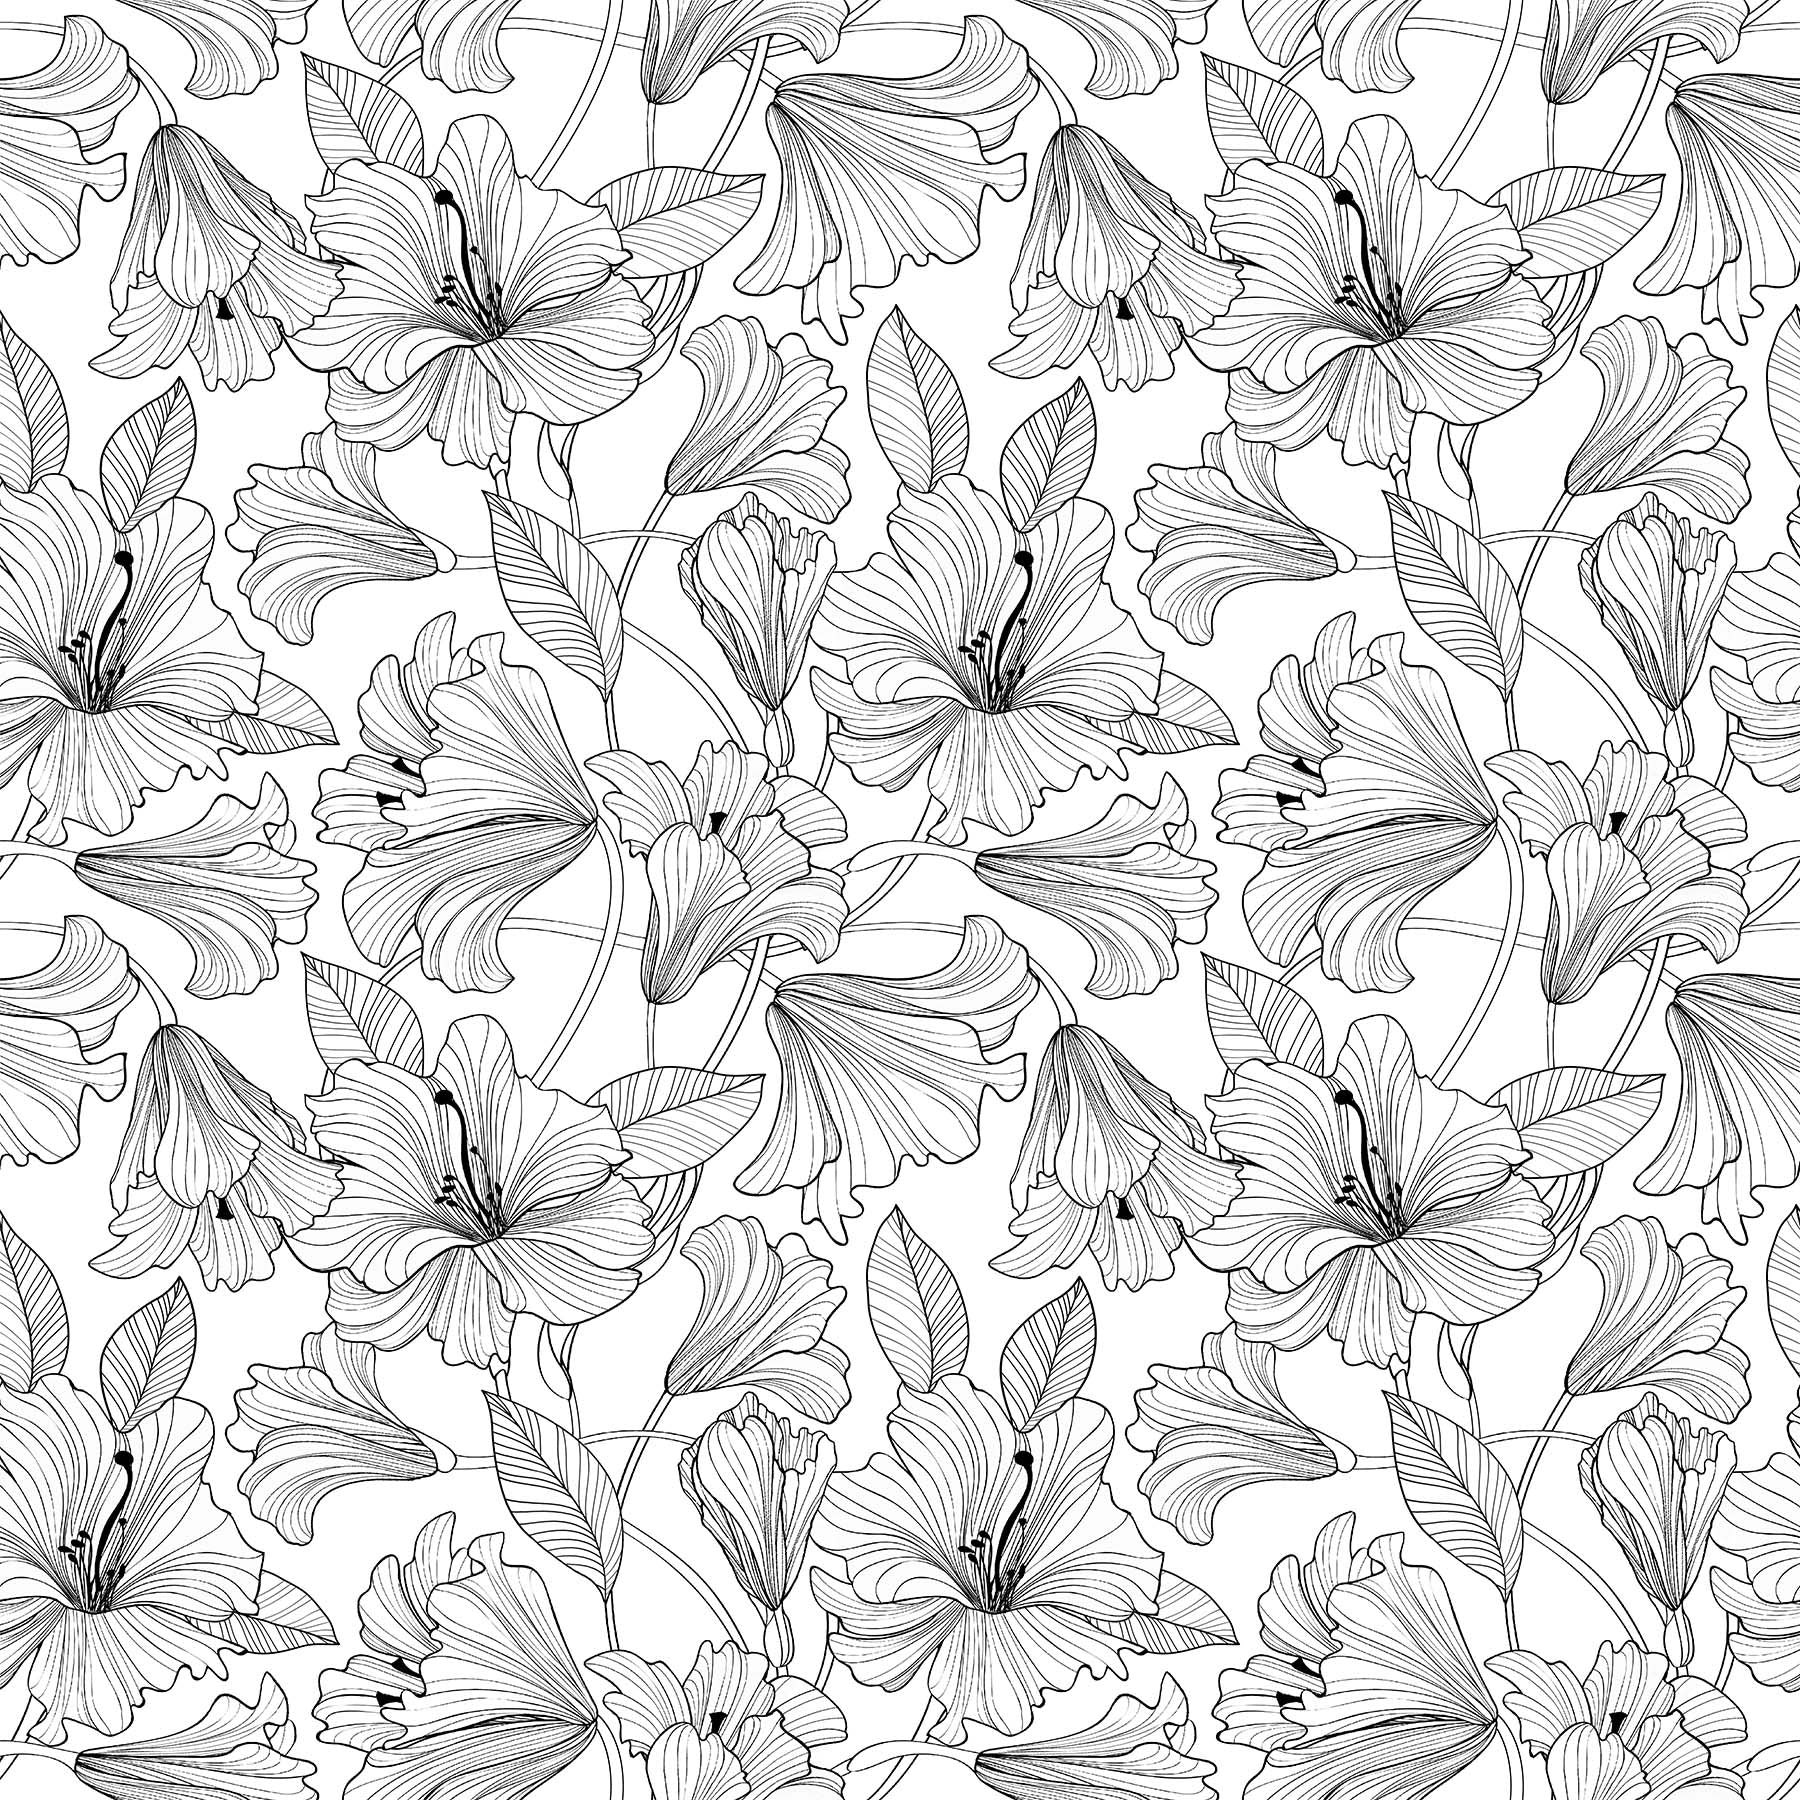 Simply Neutrals Quilt Fabric - Hibiscus Toss in Black on White - 23912-99